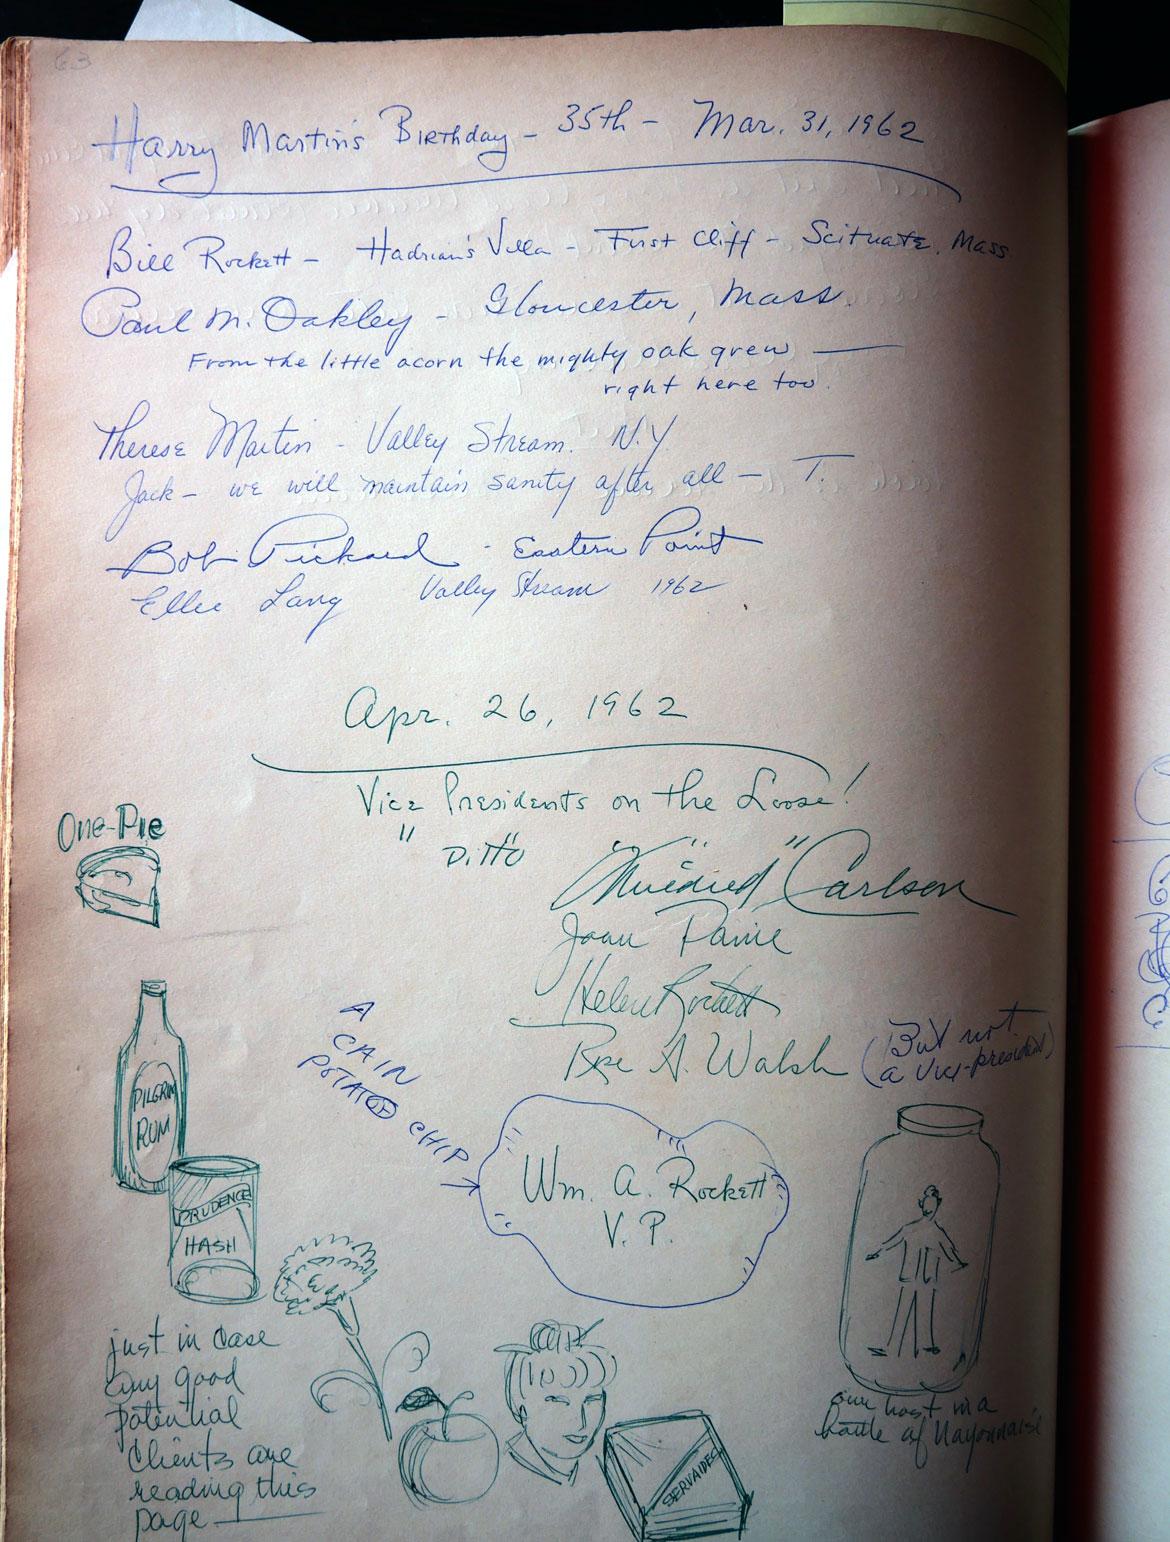 Hammond Castle guest book: Signatures of guests at Harry Martin's 35th birthday March 31, 1962. (©Greg Cook photo)